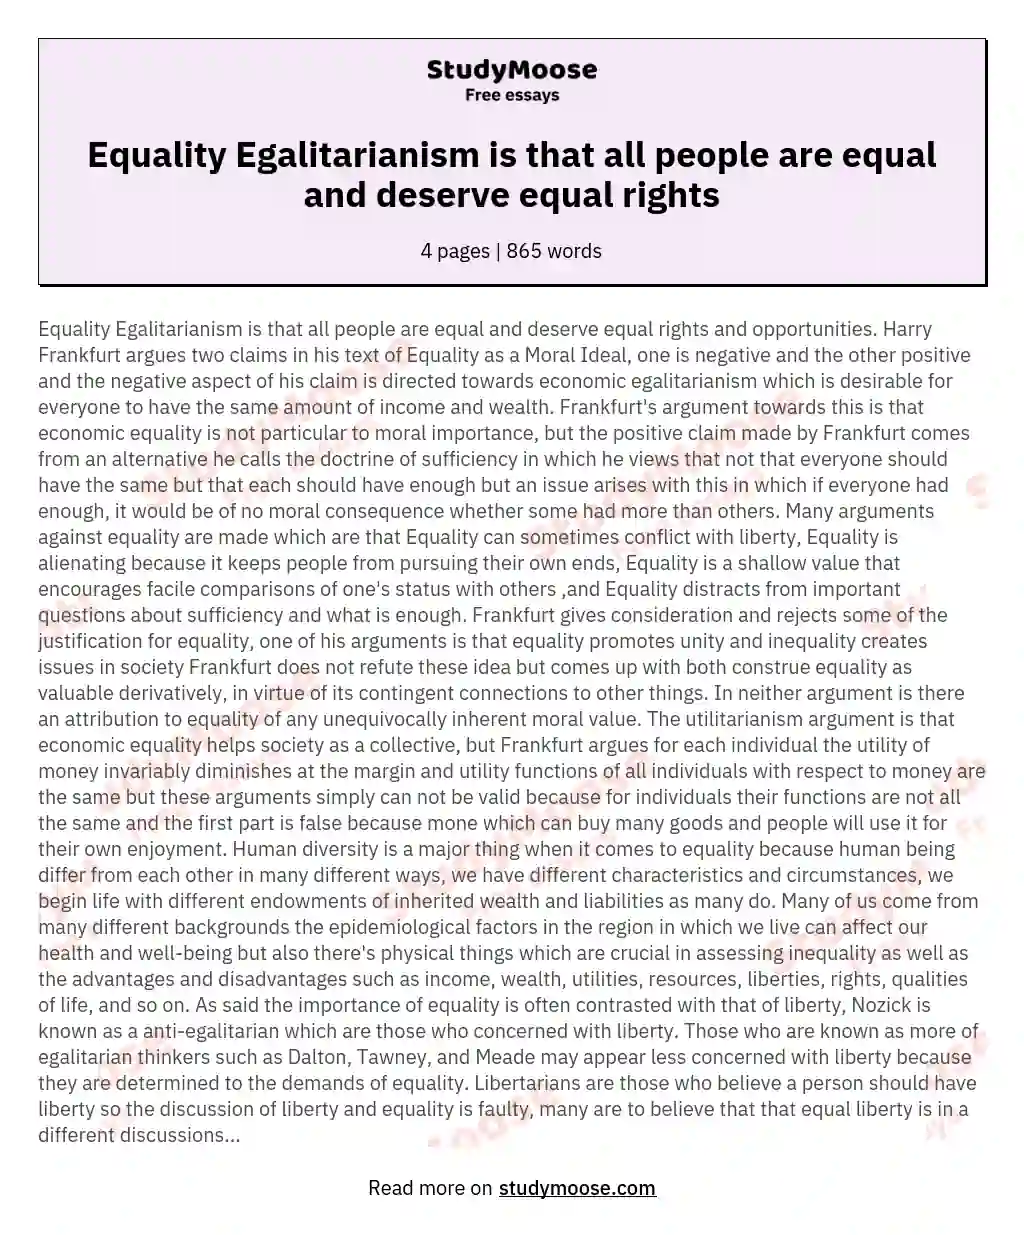 Equality Egalitarianism is that all people are equal and deserve equal rights